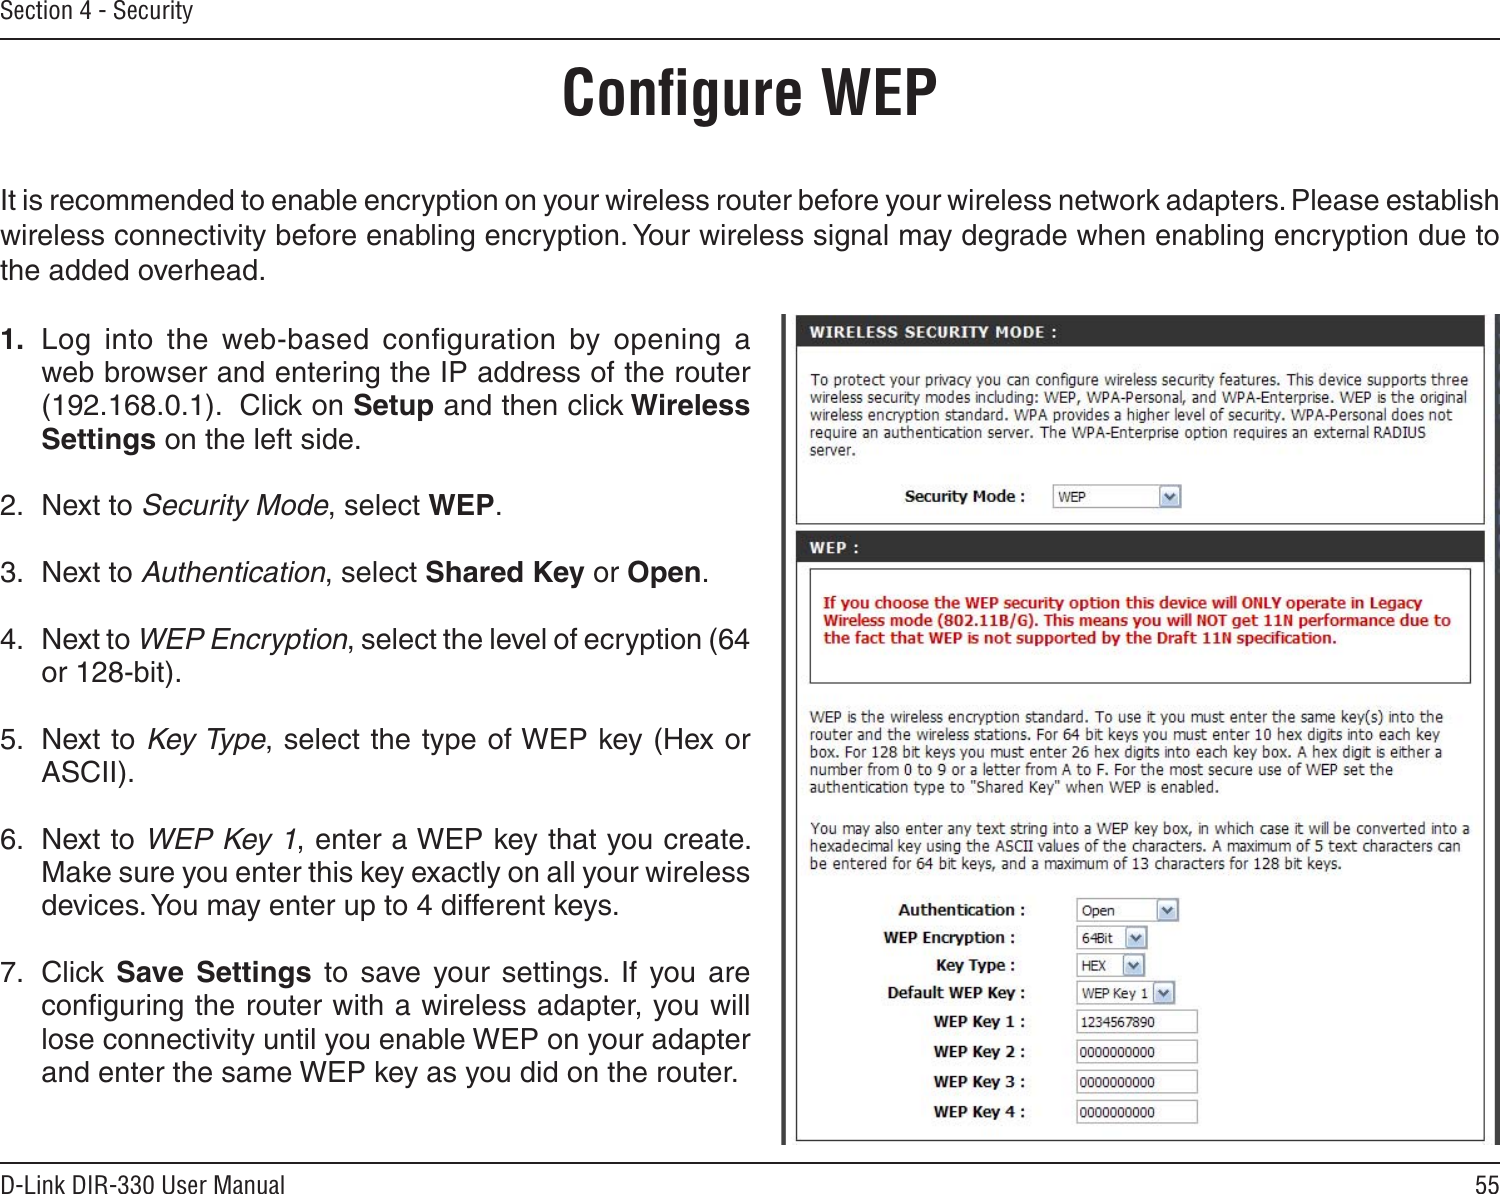 55D-Link DIR-330 User ManualSection 4 - SecurityConﬁgure WEPIt is recommended to enable encryption on your wireless router before your wireless network adapters. Please establish wireless connectivity before enabling encryption. Your wireless signal may degrade when enabling encryption due to the added overhead.1.  Log  into  the  web-based  conﬁguration  by  opening  a web browser and entering the IP address of the router (192.168.0.1).  Click on Setup and then click Wireless Settings on the left side.2.  Next to Security Mode, select WEP.3.  Next to Authentication, select Shared Key or Open.4.  Next to WEP Encryption, select the level of ecryption (64 or 128-bit).5.  Next to Key Type, select the type of WEP key (Hex or ASCII).   6.  Next to WEP Key 1, enter a WEP key that you create. Make sure you enter this key exactly on all your wireless devices. You may enter up to 4 different keys.7.  Click  Save  Settings  to  save  your  settings.  If  you  are conﬁguring the router with a wireless adapter, you will lose connectivity until you enable WEP on your adapter and enter the same WEP key as you did on the router.